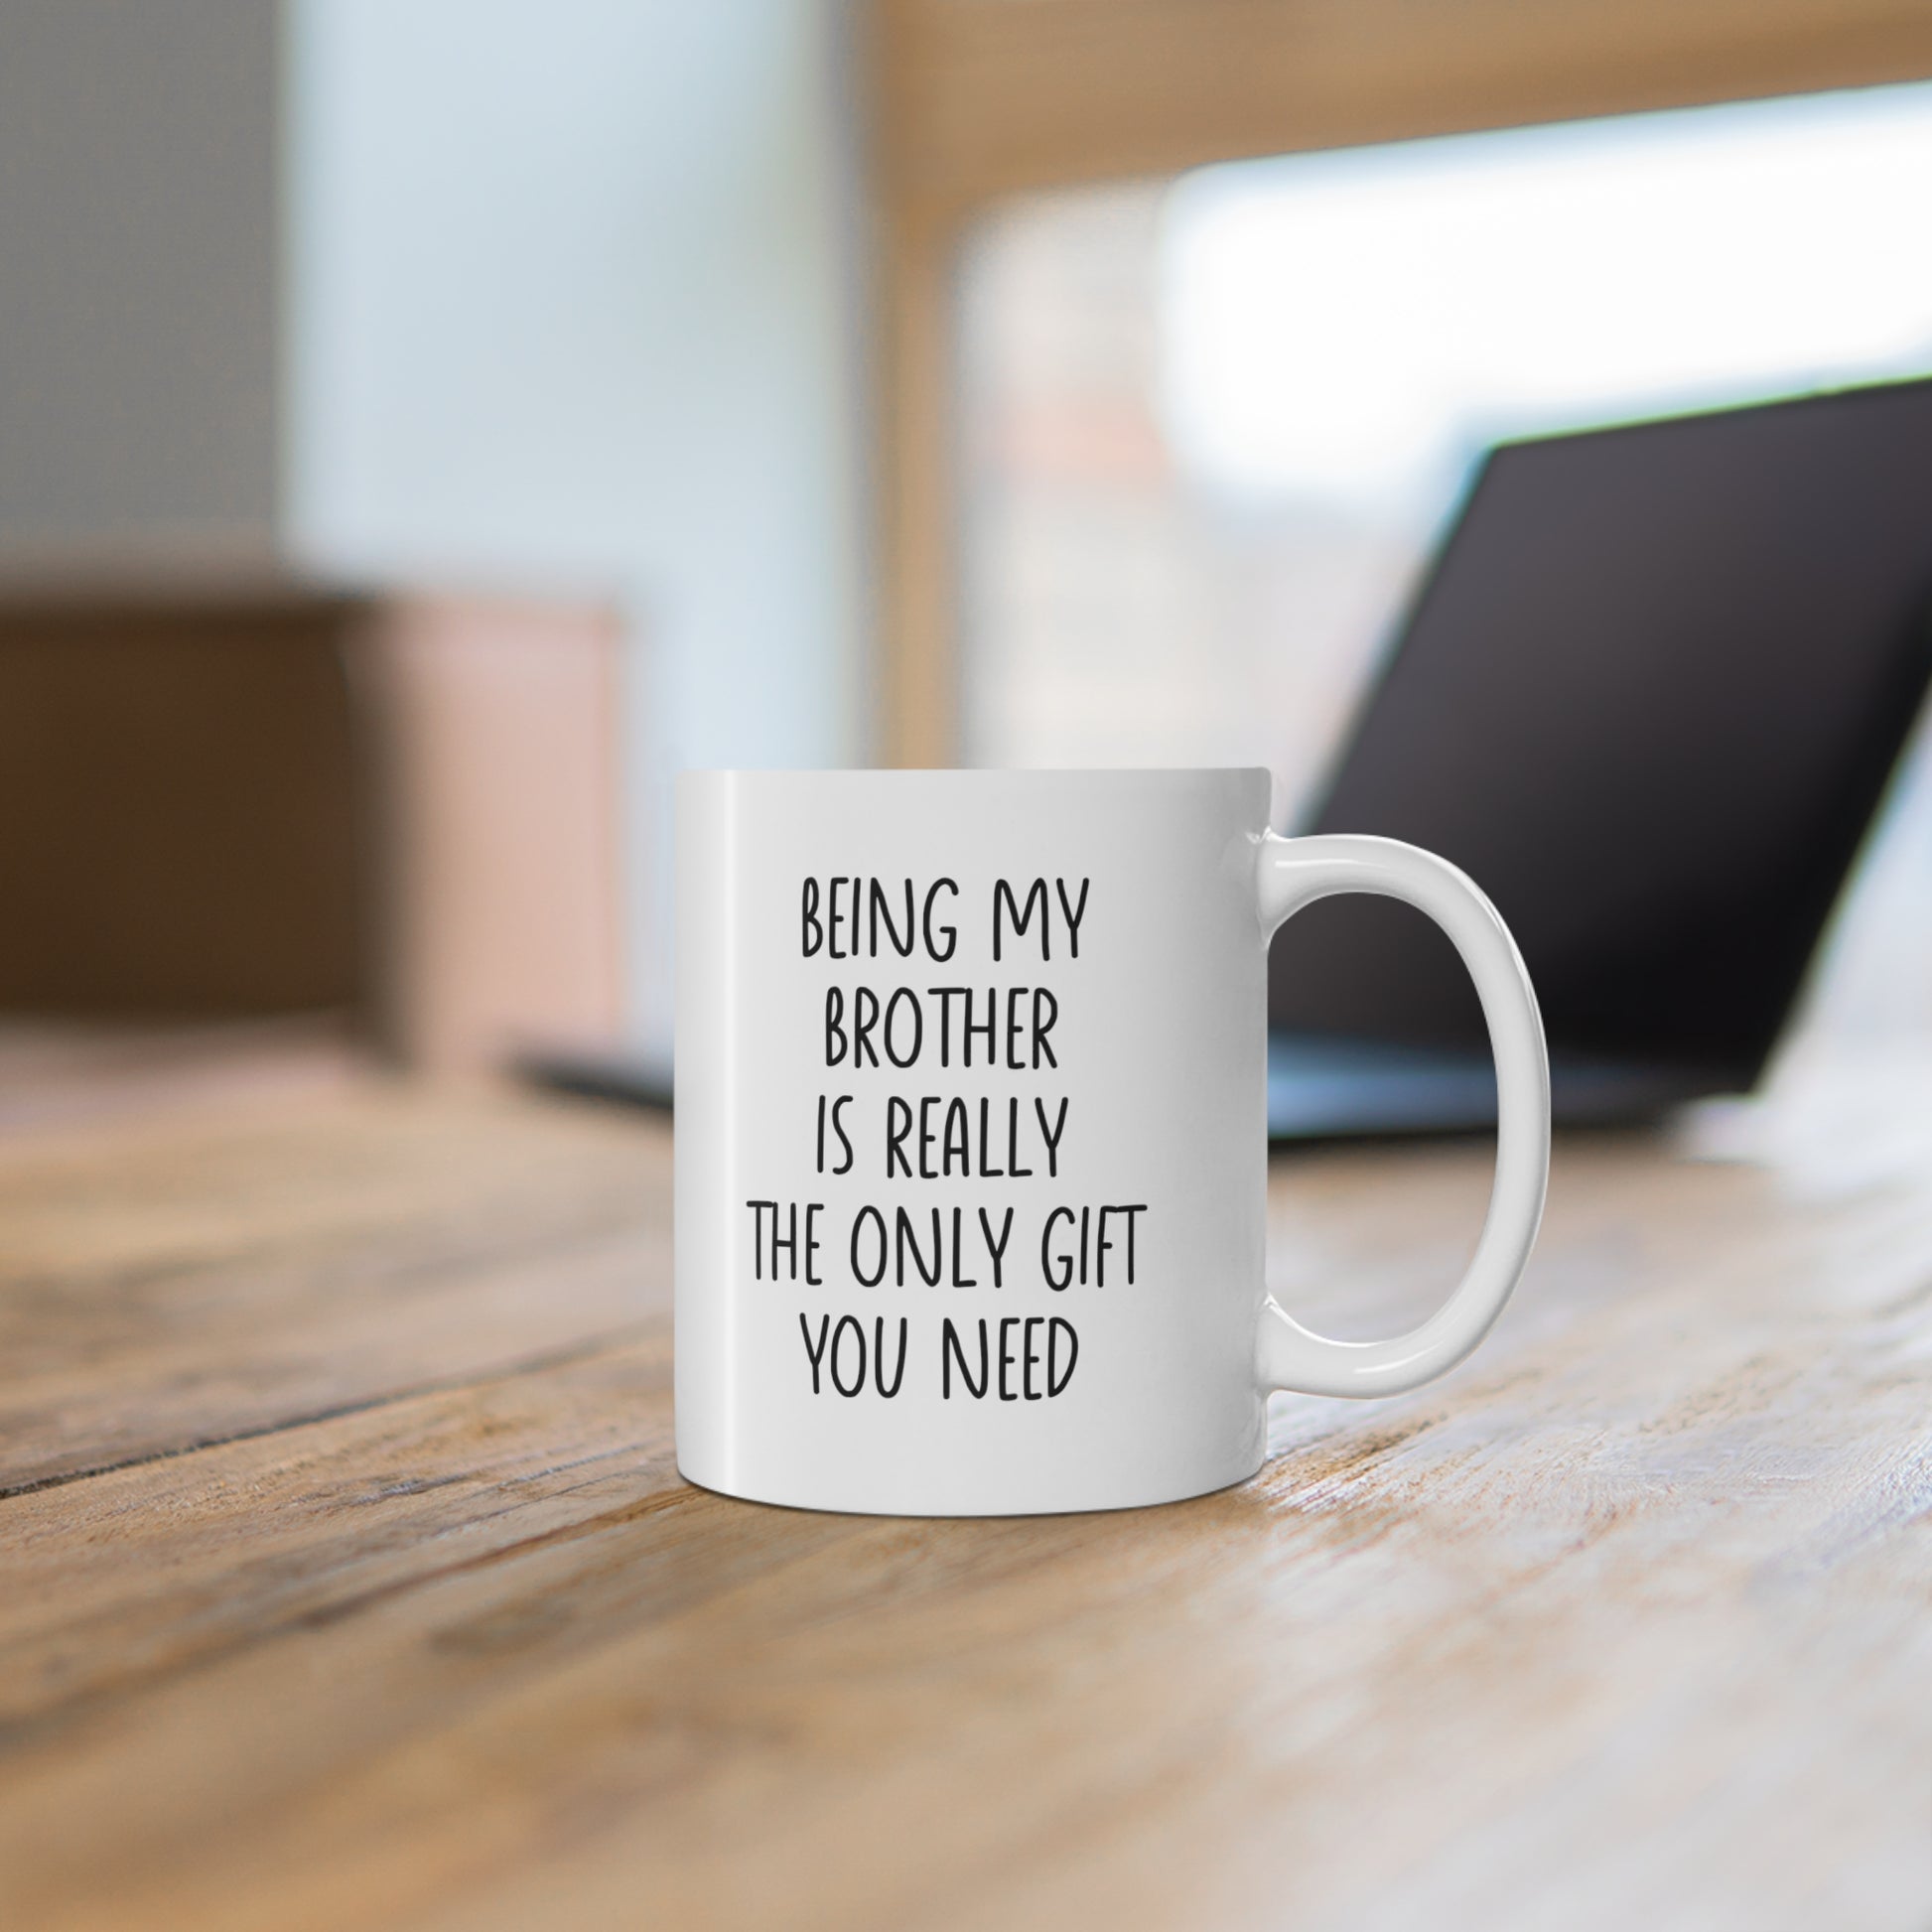 ceramic cup with quote: Being My Brother is Really the Only Gift You Need